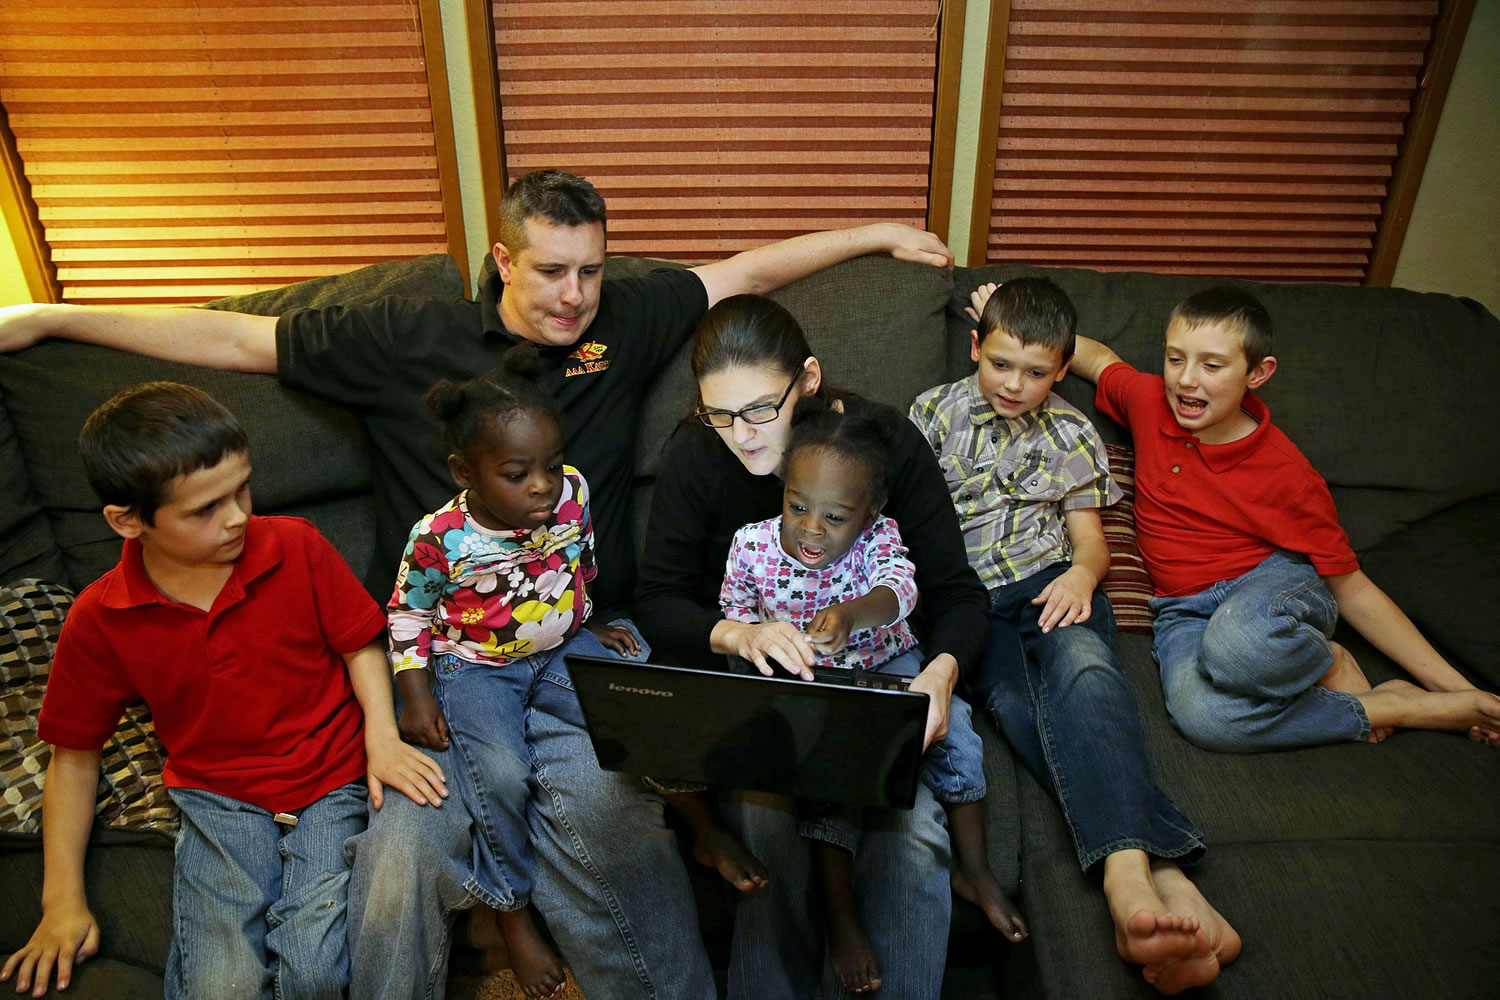 Joel and Tessa Sanborn hold their adopted twins, Favor, right, and Faith, left, 2, as they sit with their siblings and look at a computer photo of the twins' older brother Devine in Maple Valley.